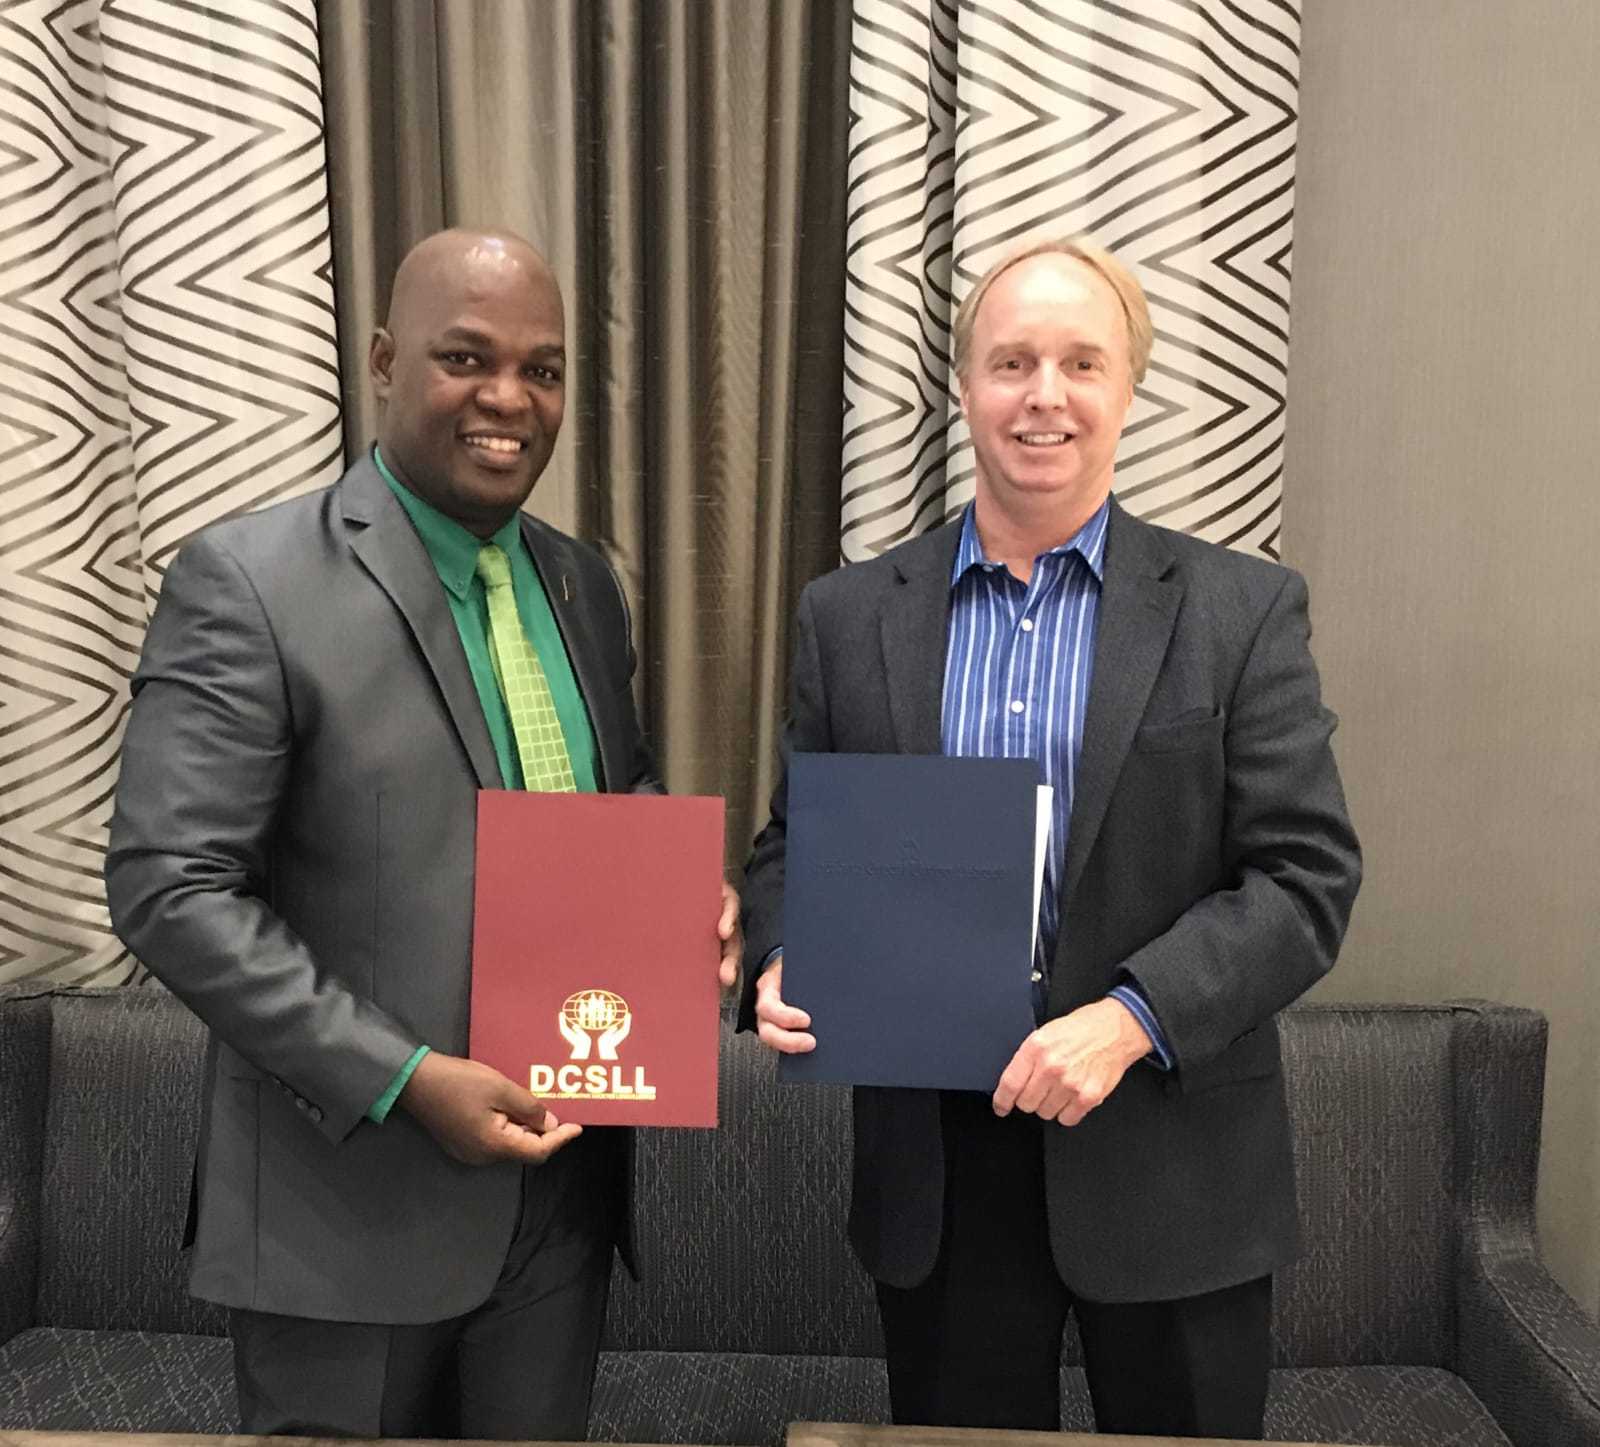  Indiana Credit Union League and the Dominica Co-operative Societies League Sign Historic Memorandum of Understanding for Co-operation and Technical Support